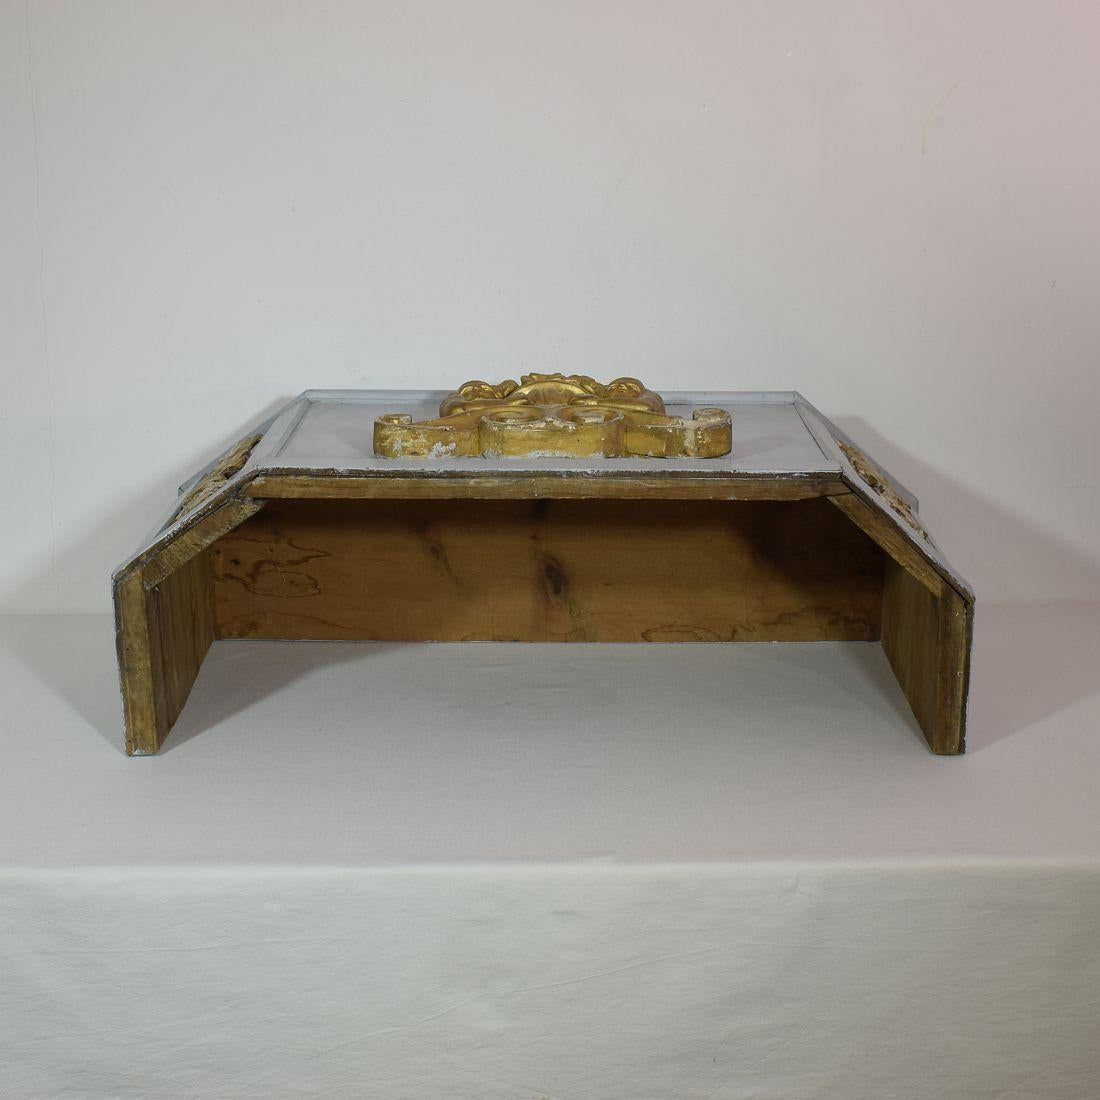 18th Century Italian Neoclassical Carved Wooden Altar For Sale 15